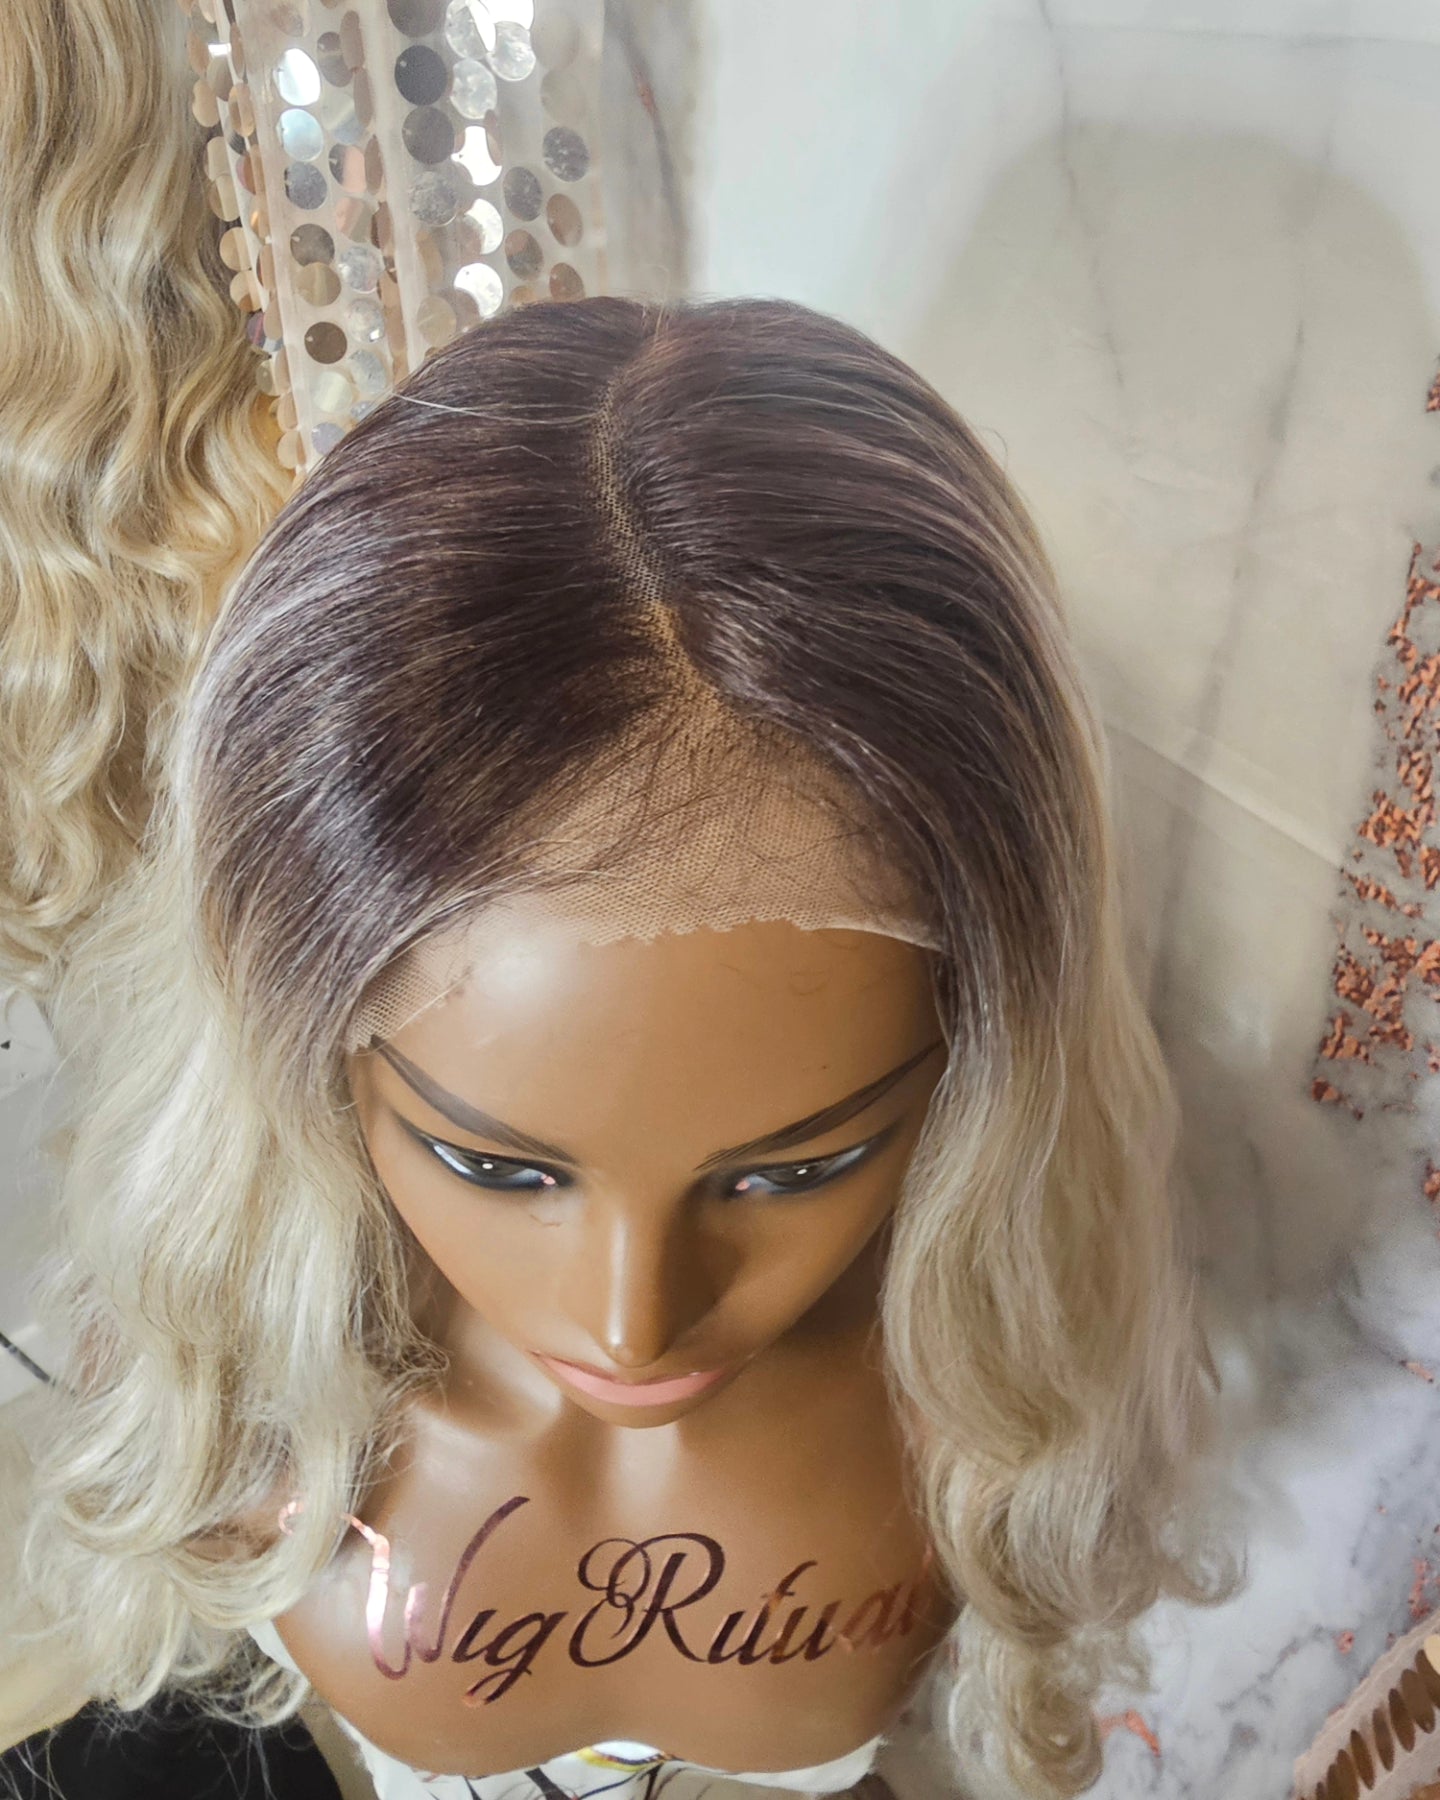 40' dark root blonde Lace font wig